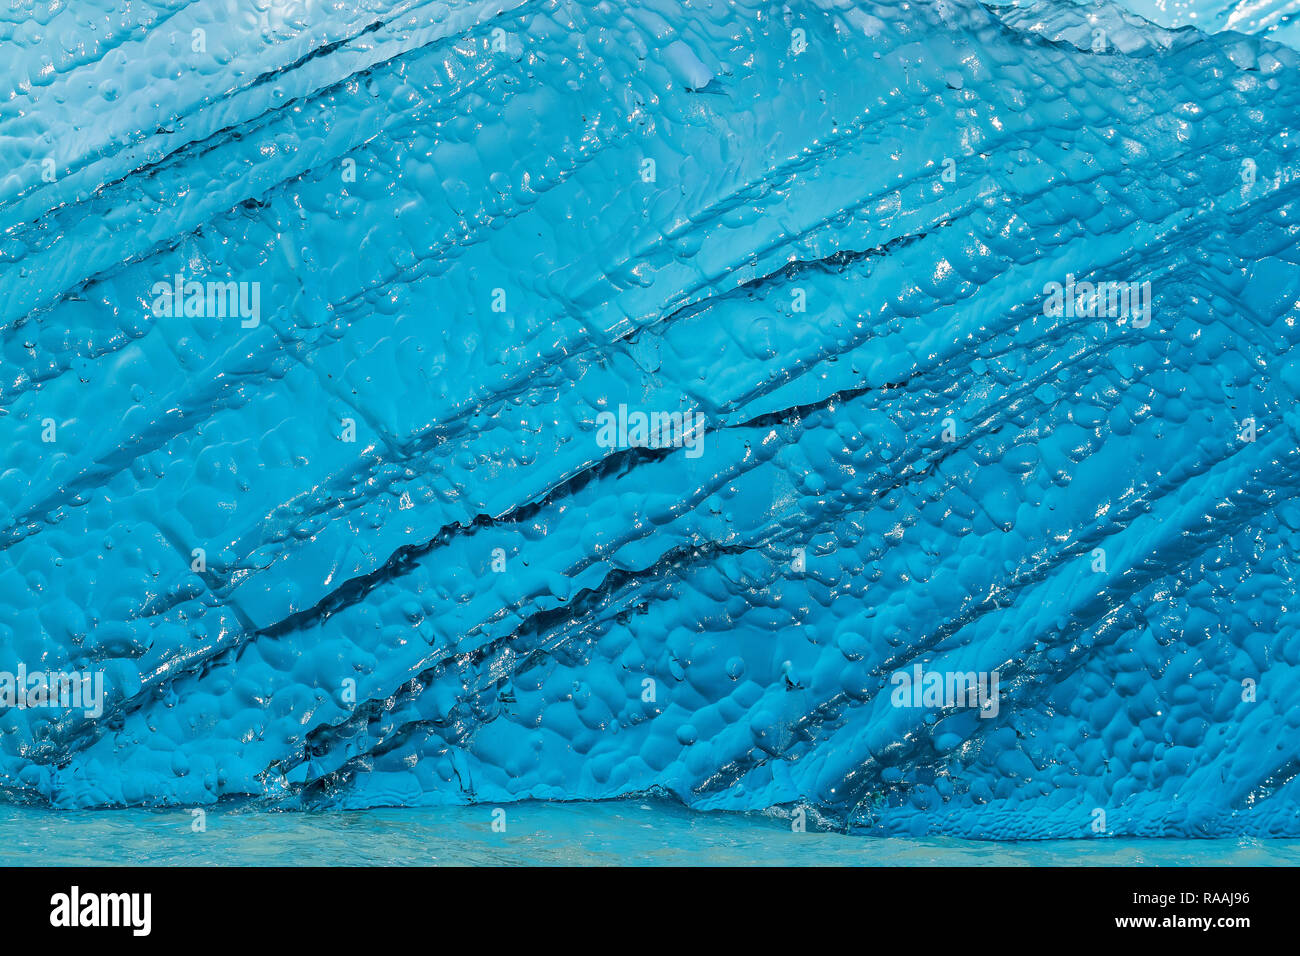 Blue ice in front of the Dawes Glacier in Endicott Arm in Southeast Alaska, USA. Stock Photo